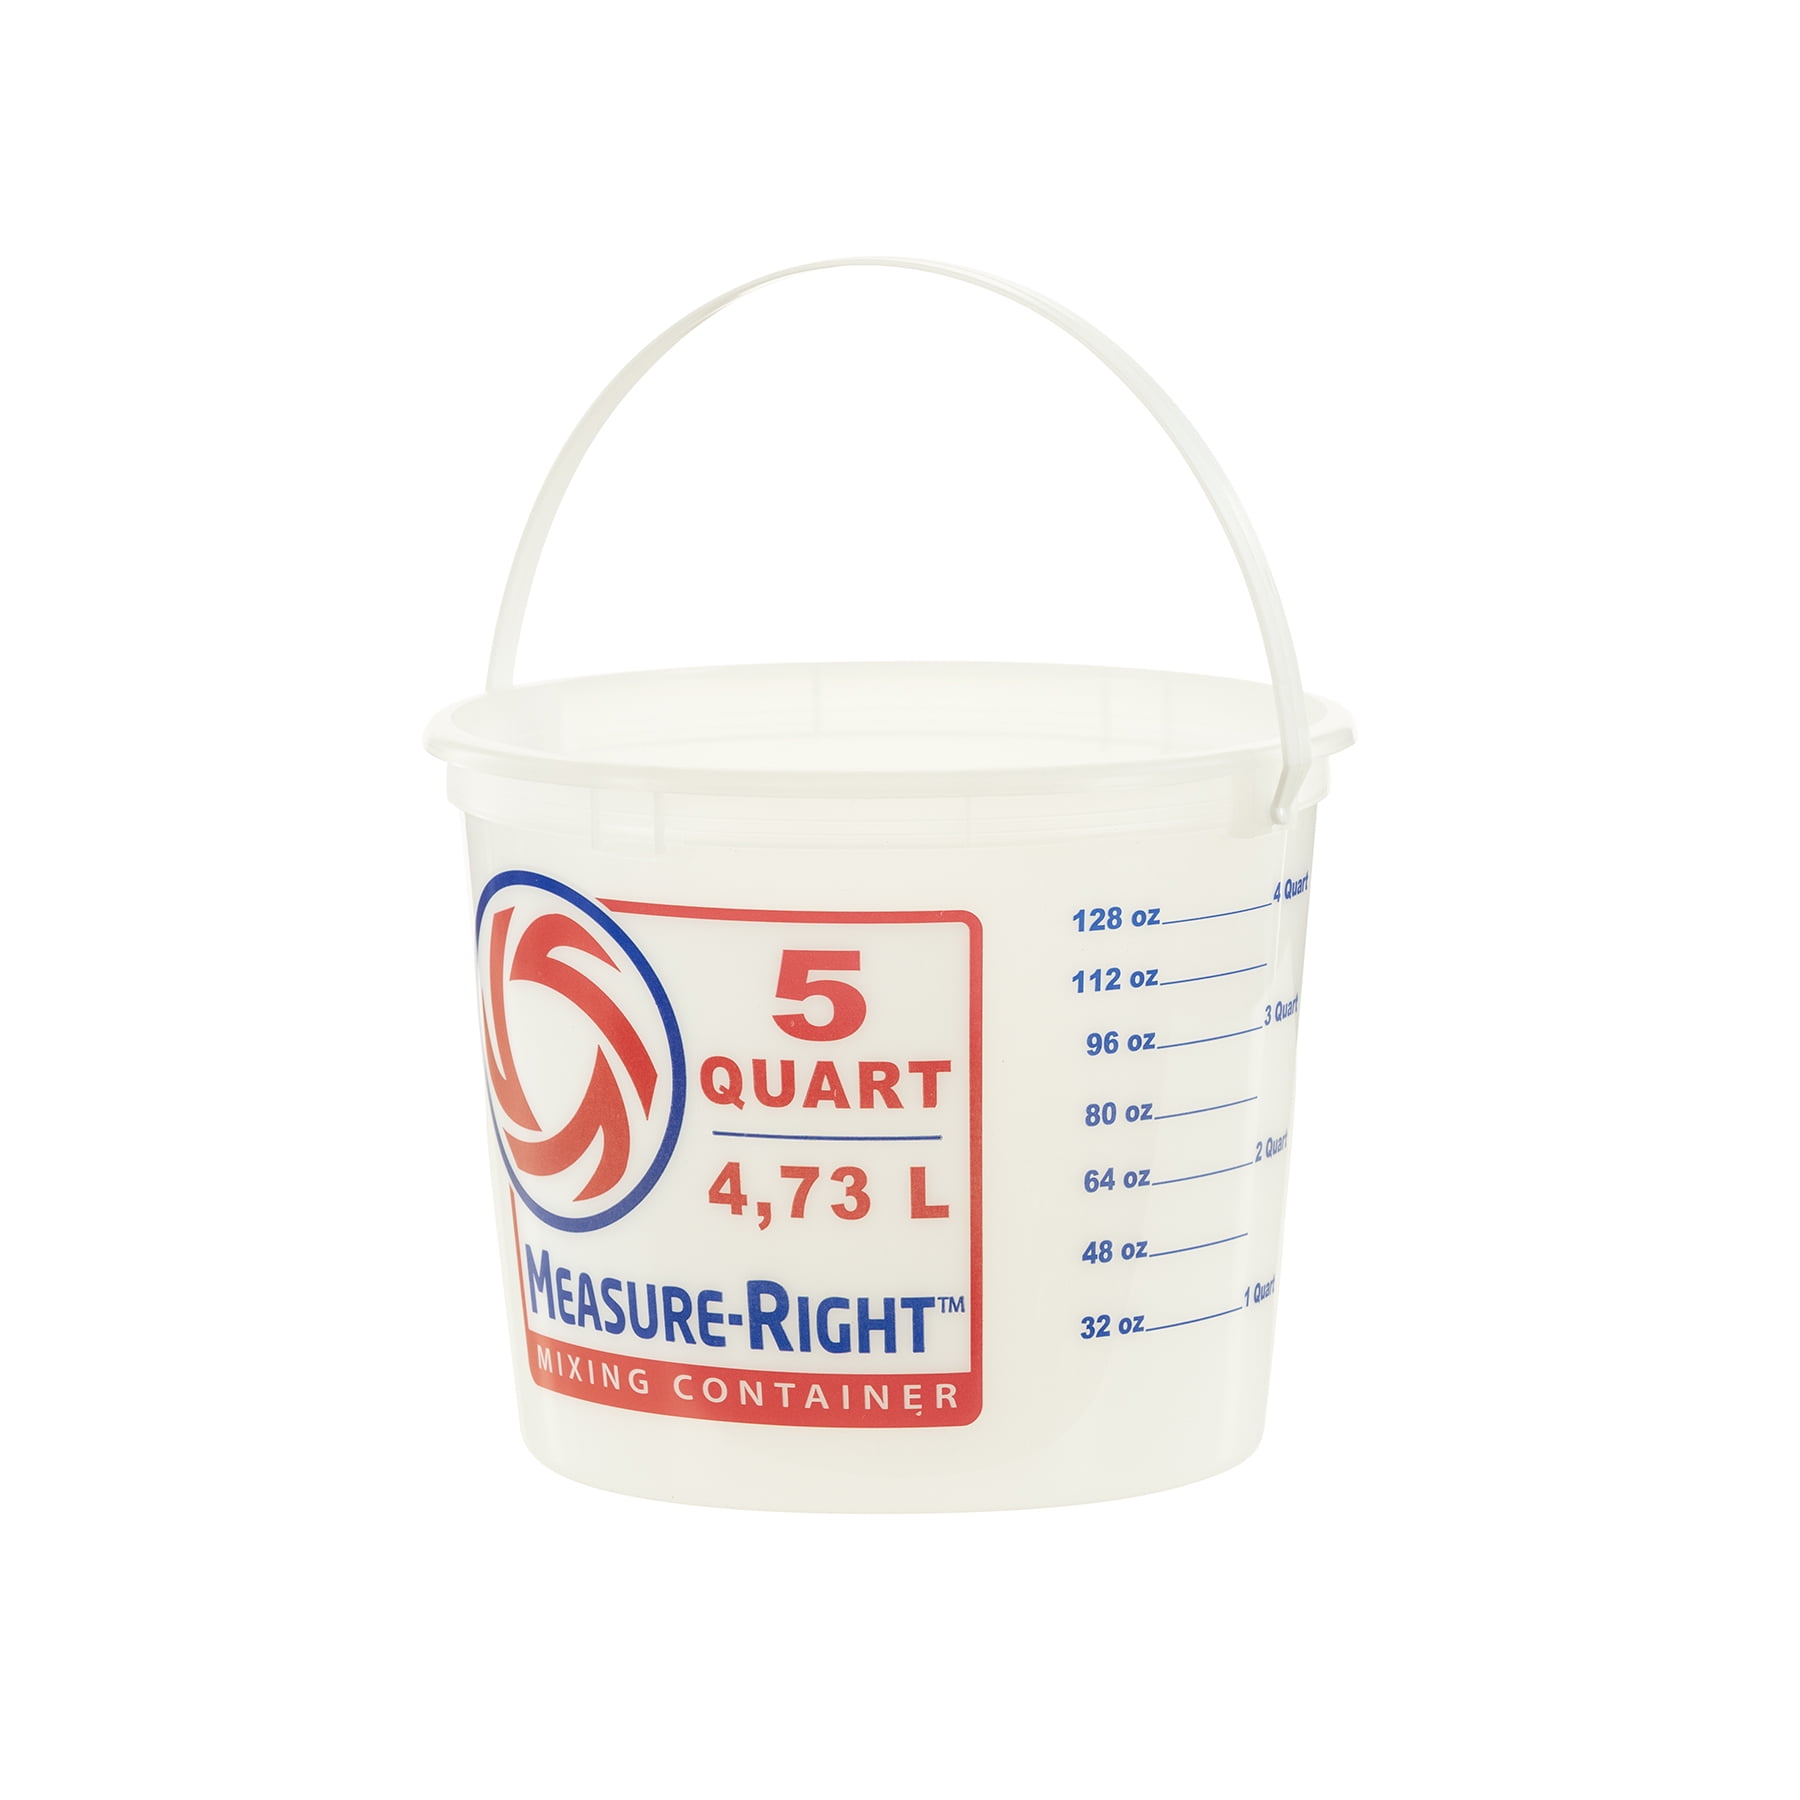 United Solutions 5 Gallon Bucket Heavy Duty Plastic Bucket Comfortable  Handle Easy to Clean Perfect for on The Job Home Improvement or Household